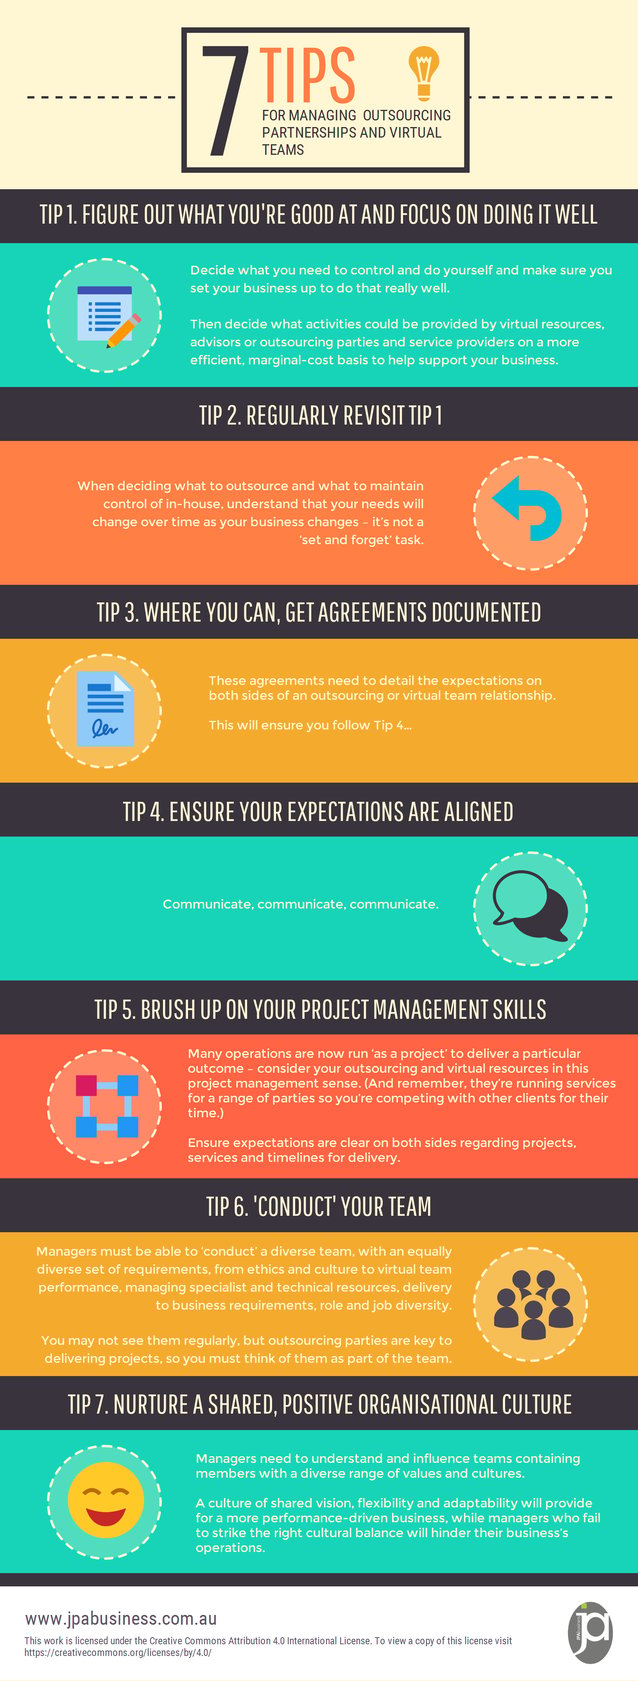 7-tips-for-managing-outsourcing.png